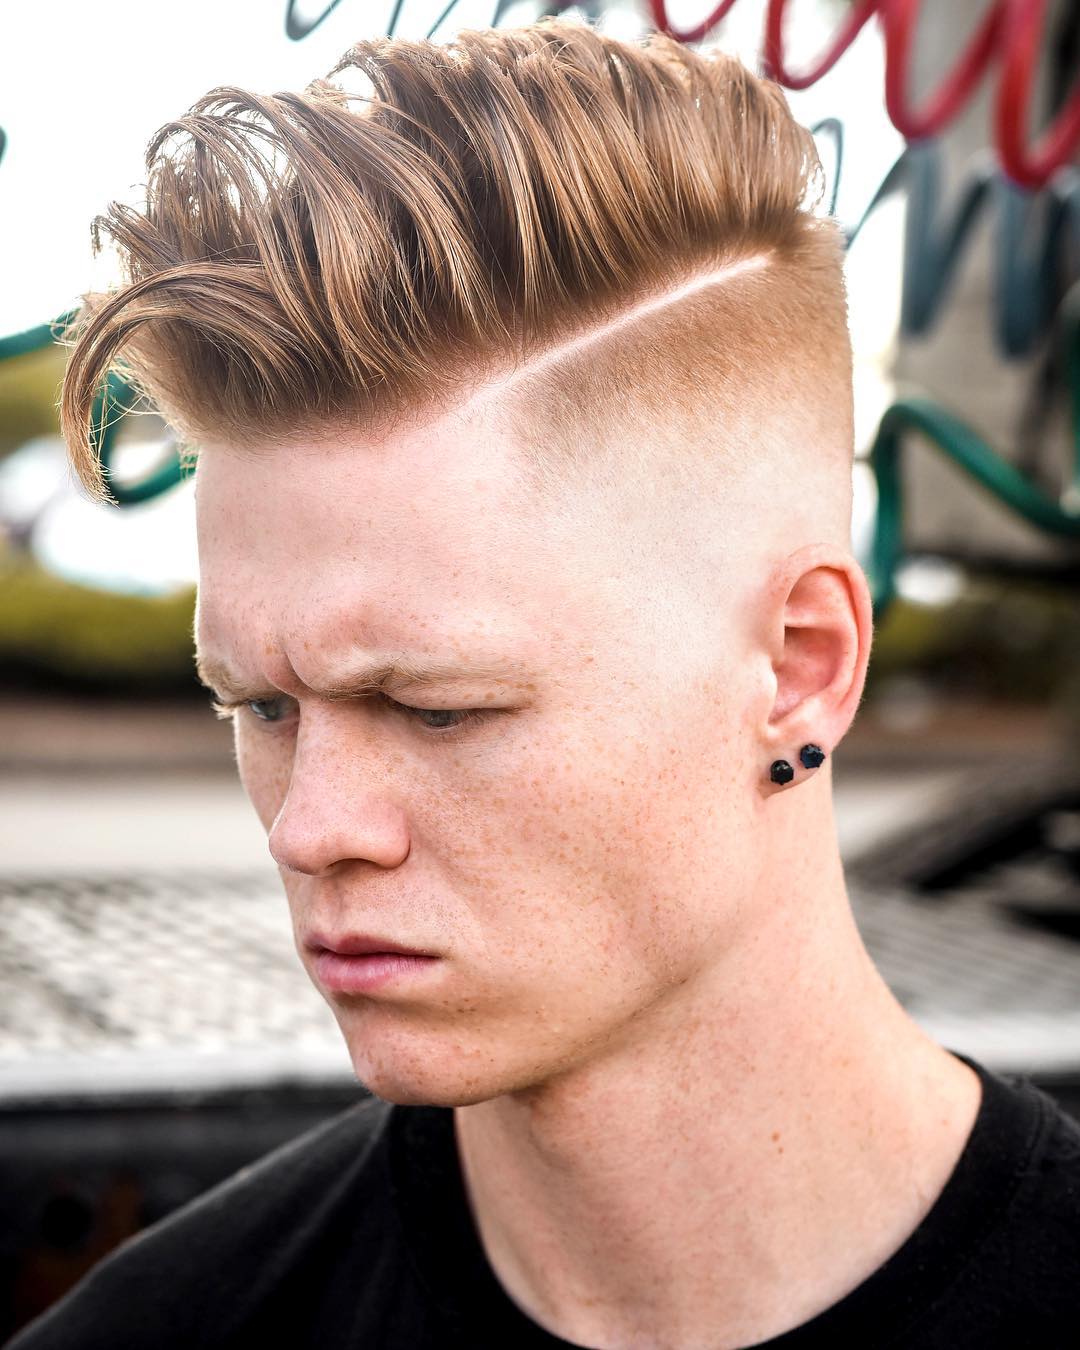 Types Of Haircuts For Men: The Ultimate Guide To Different Haircut Styles